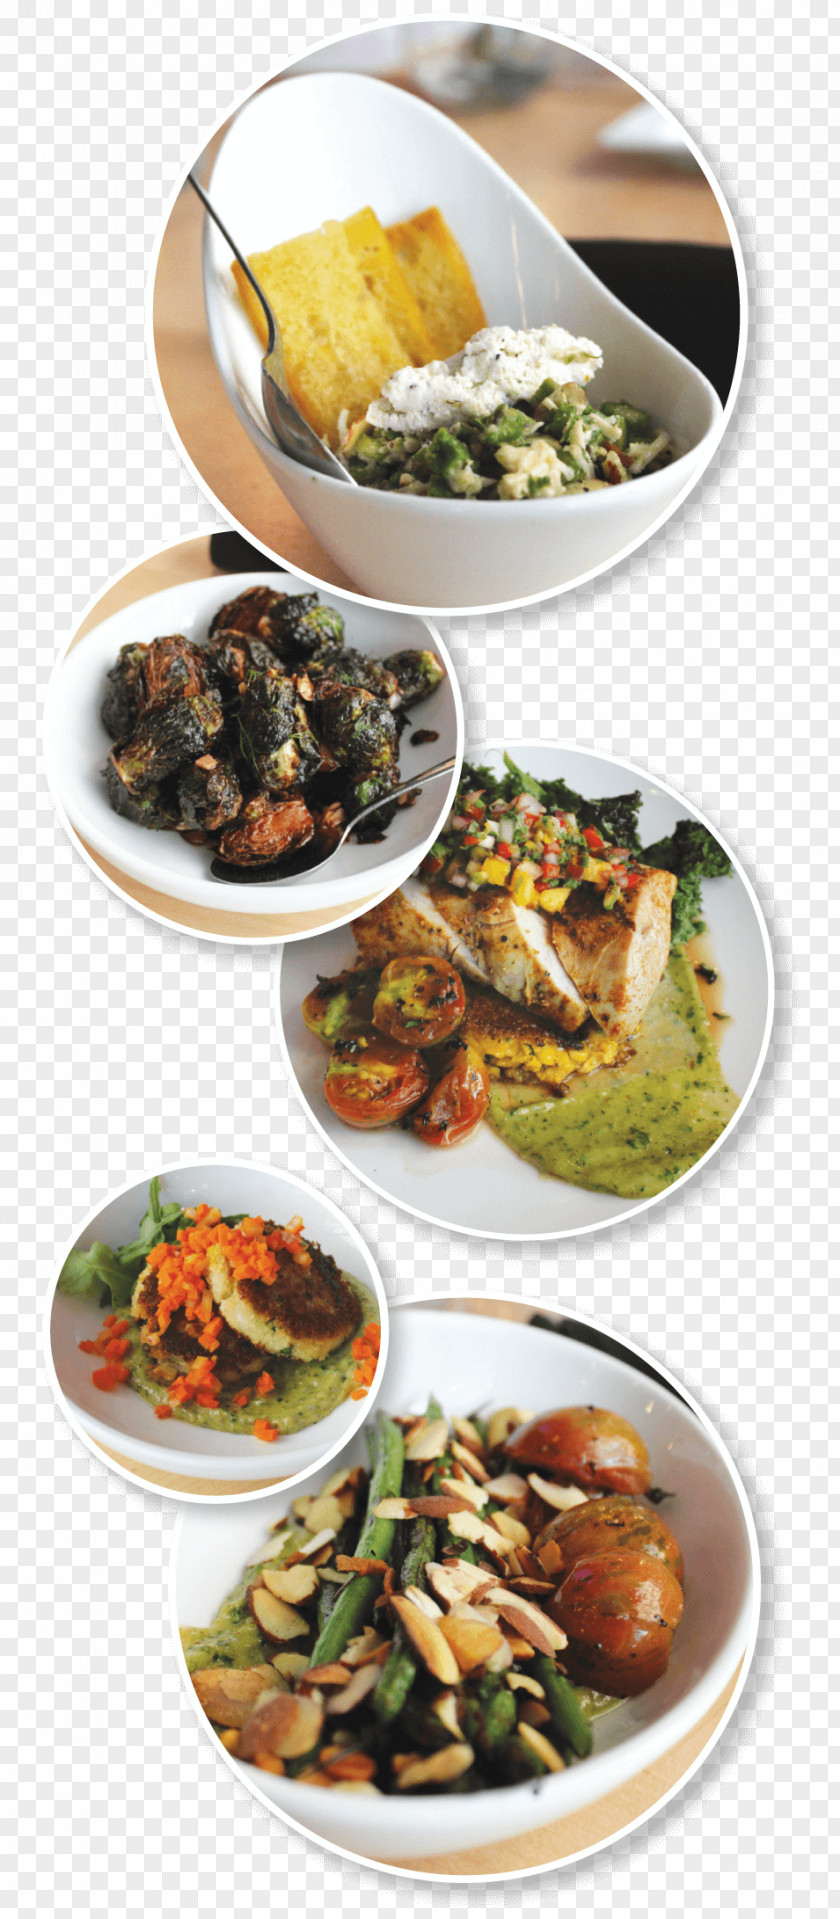 Restaurant Dishes Vegetarian Cuisine Meze Plate Lunch Asian PNG